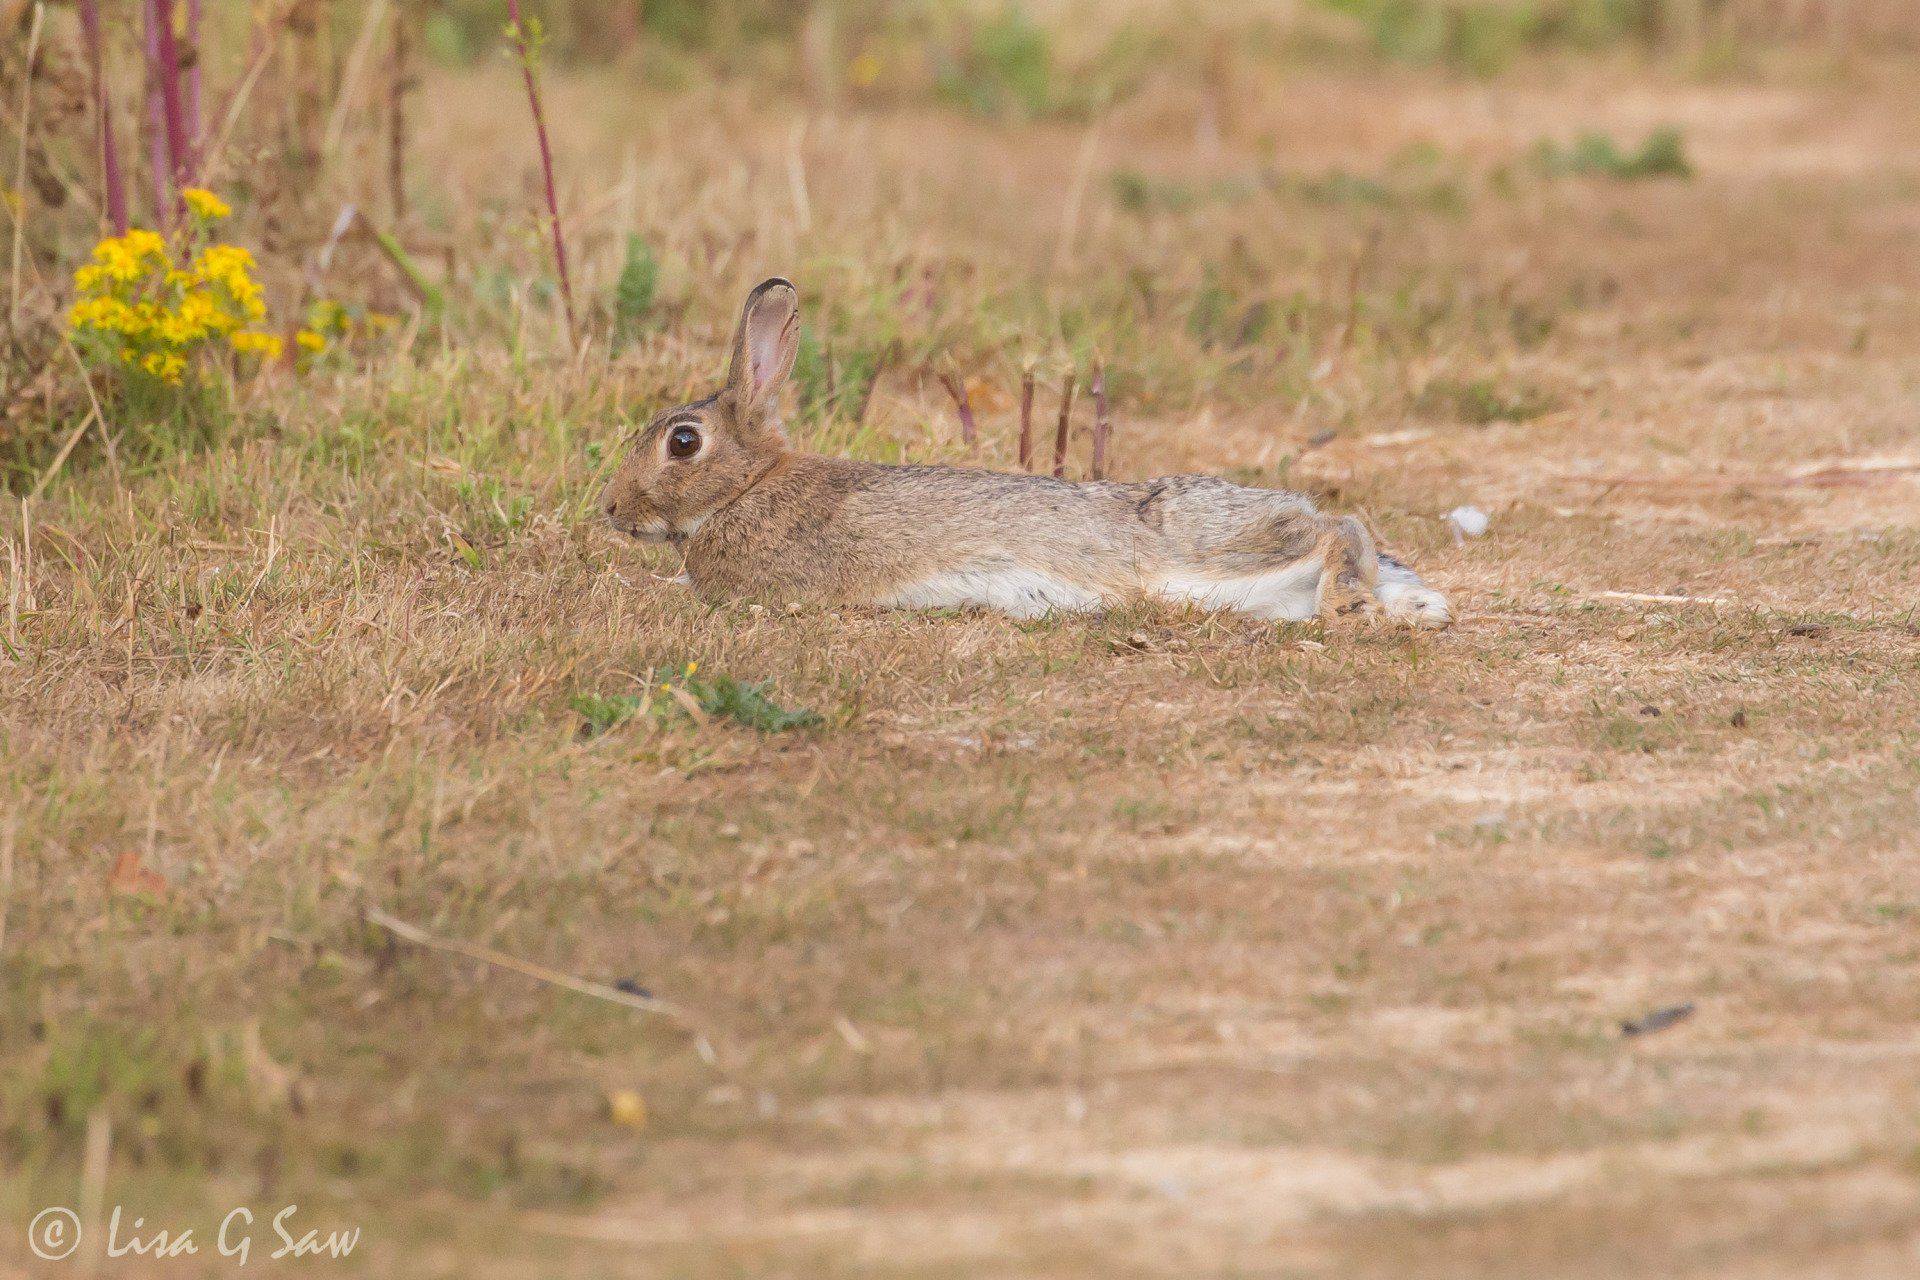 Relaxed rabbit lying on the ground